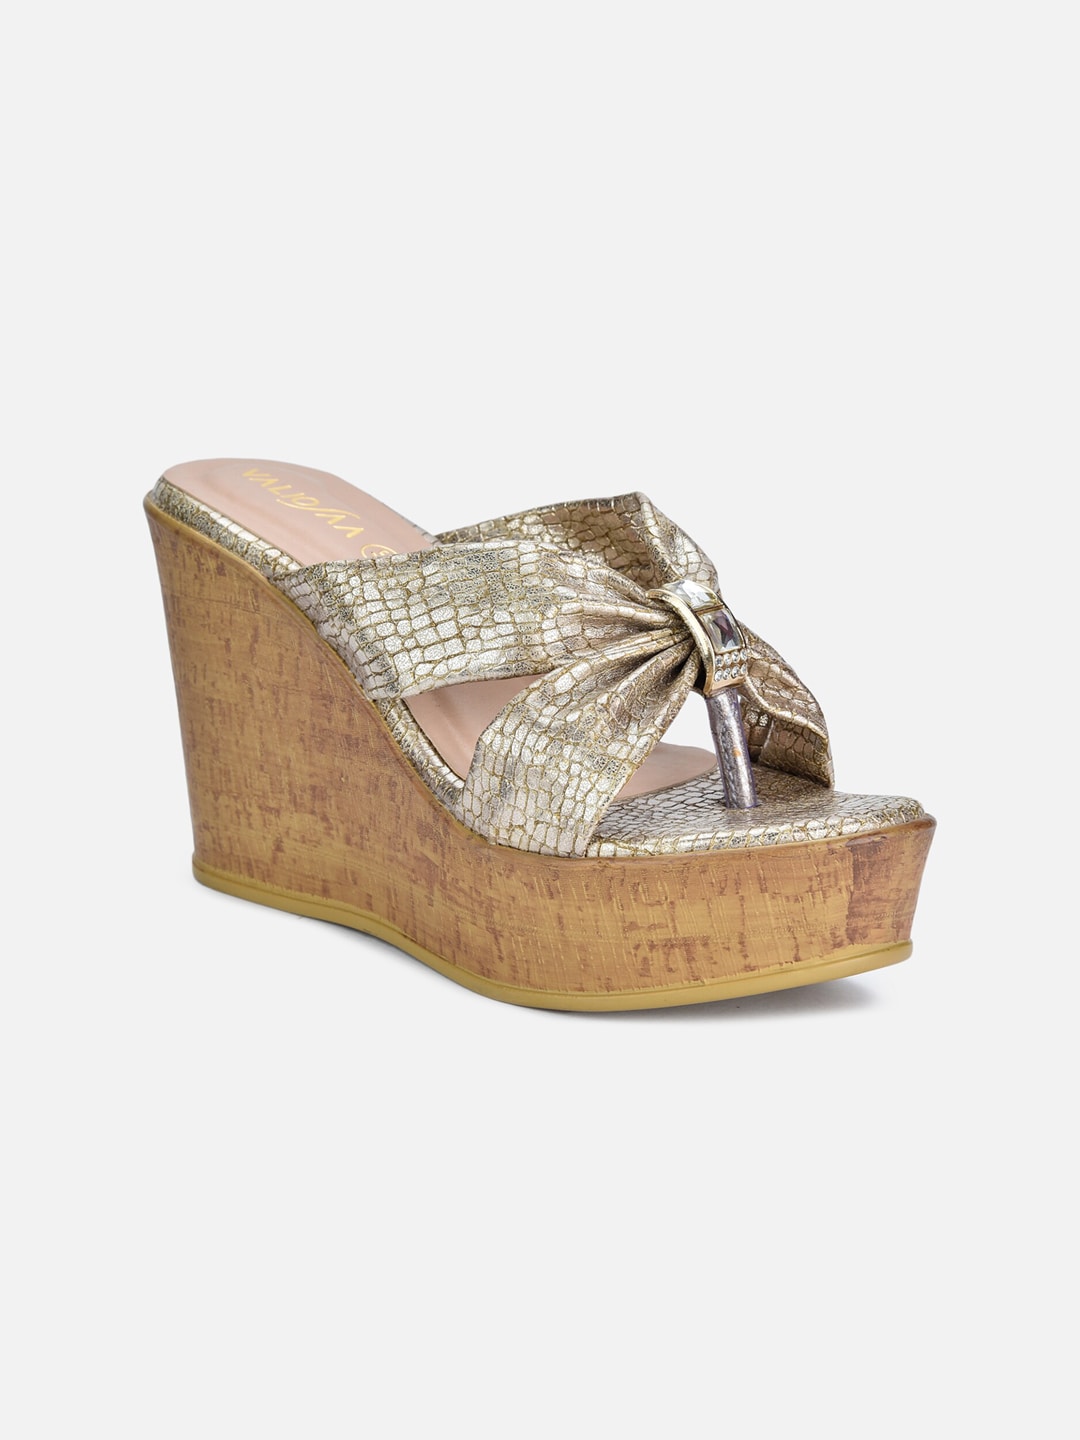 VALIOSAA Gold-Toned Party Wedge Sandals Price in India